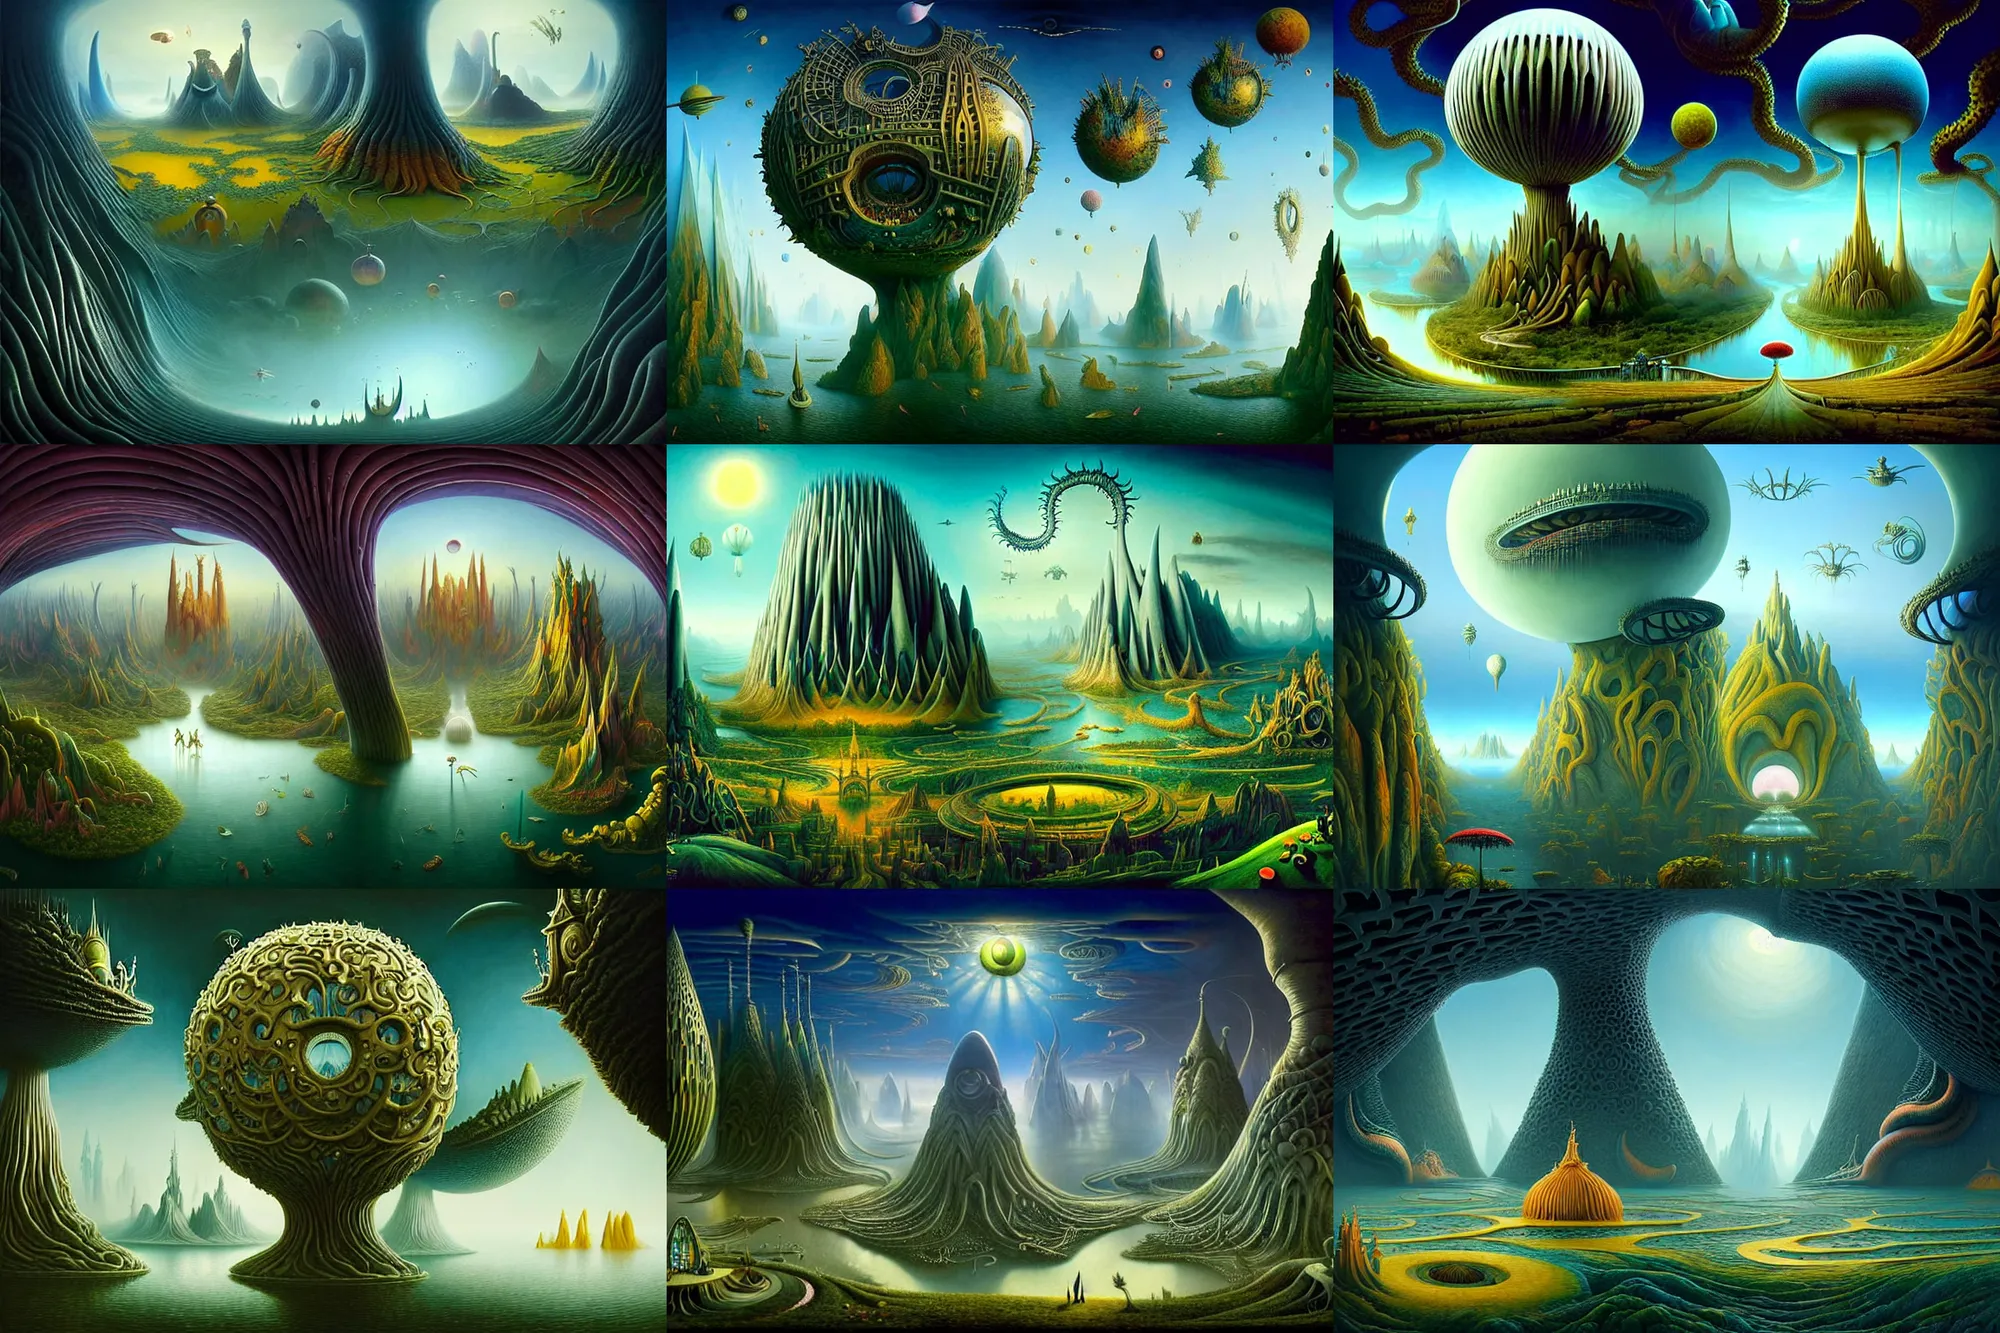 Prompt: a beguiling epic stunning beautiful and insanely detailed matte painting of alien dream worlds with surreal architecture designed by Heironymous Bosch, mega structures inspired by Heironymous Bosch's Garden of Earthly Delights, vast surreal landscape and horizon by Cyril Rolando and James Gurney, masterpiece!!!, grand!, imaginative!!!, whimsical!!, epic scale, intricate details, sense of awe, elite, wonder, insanely complex, masterful composition!!!, sharp focus, fantasy realism, dramatic lighting